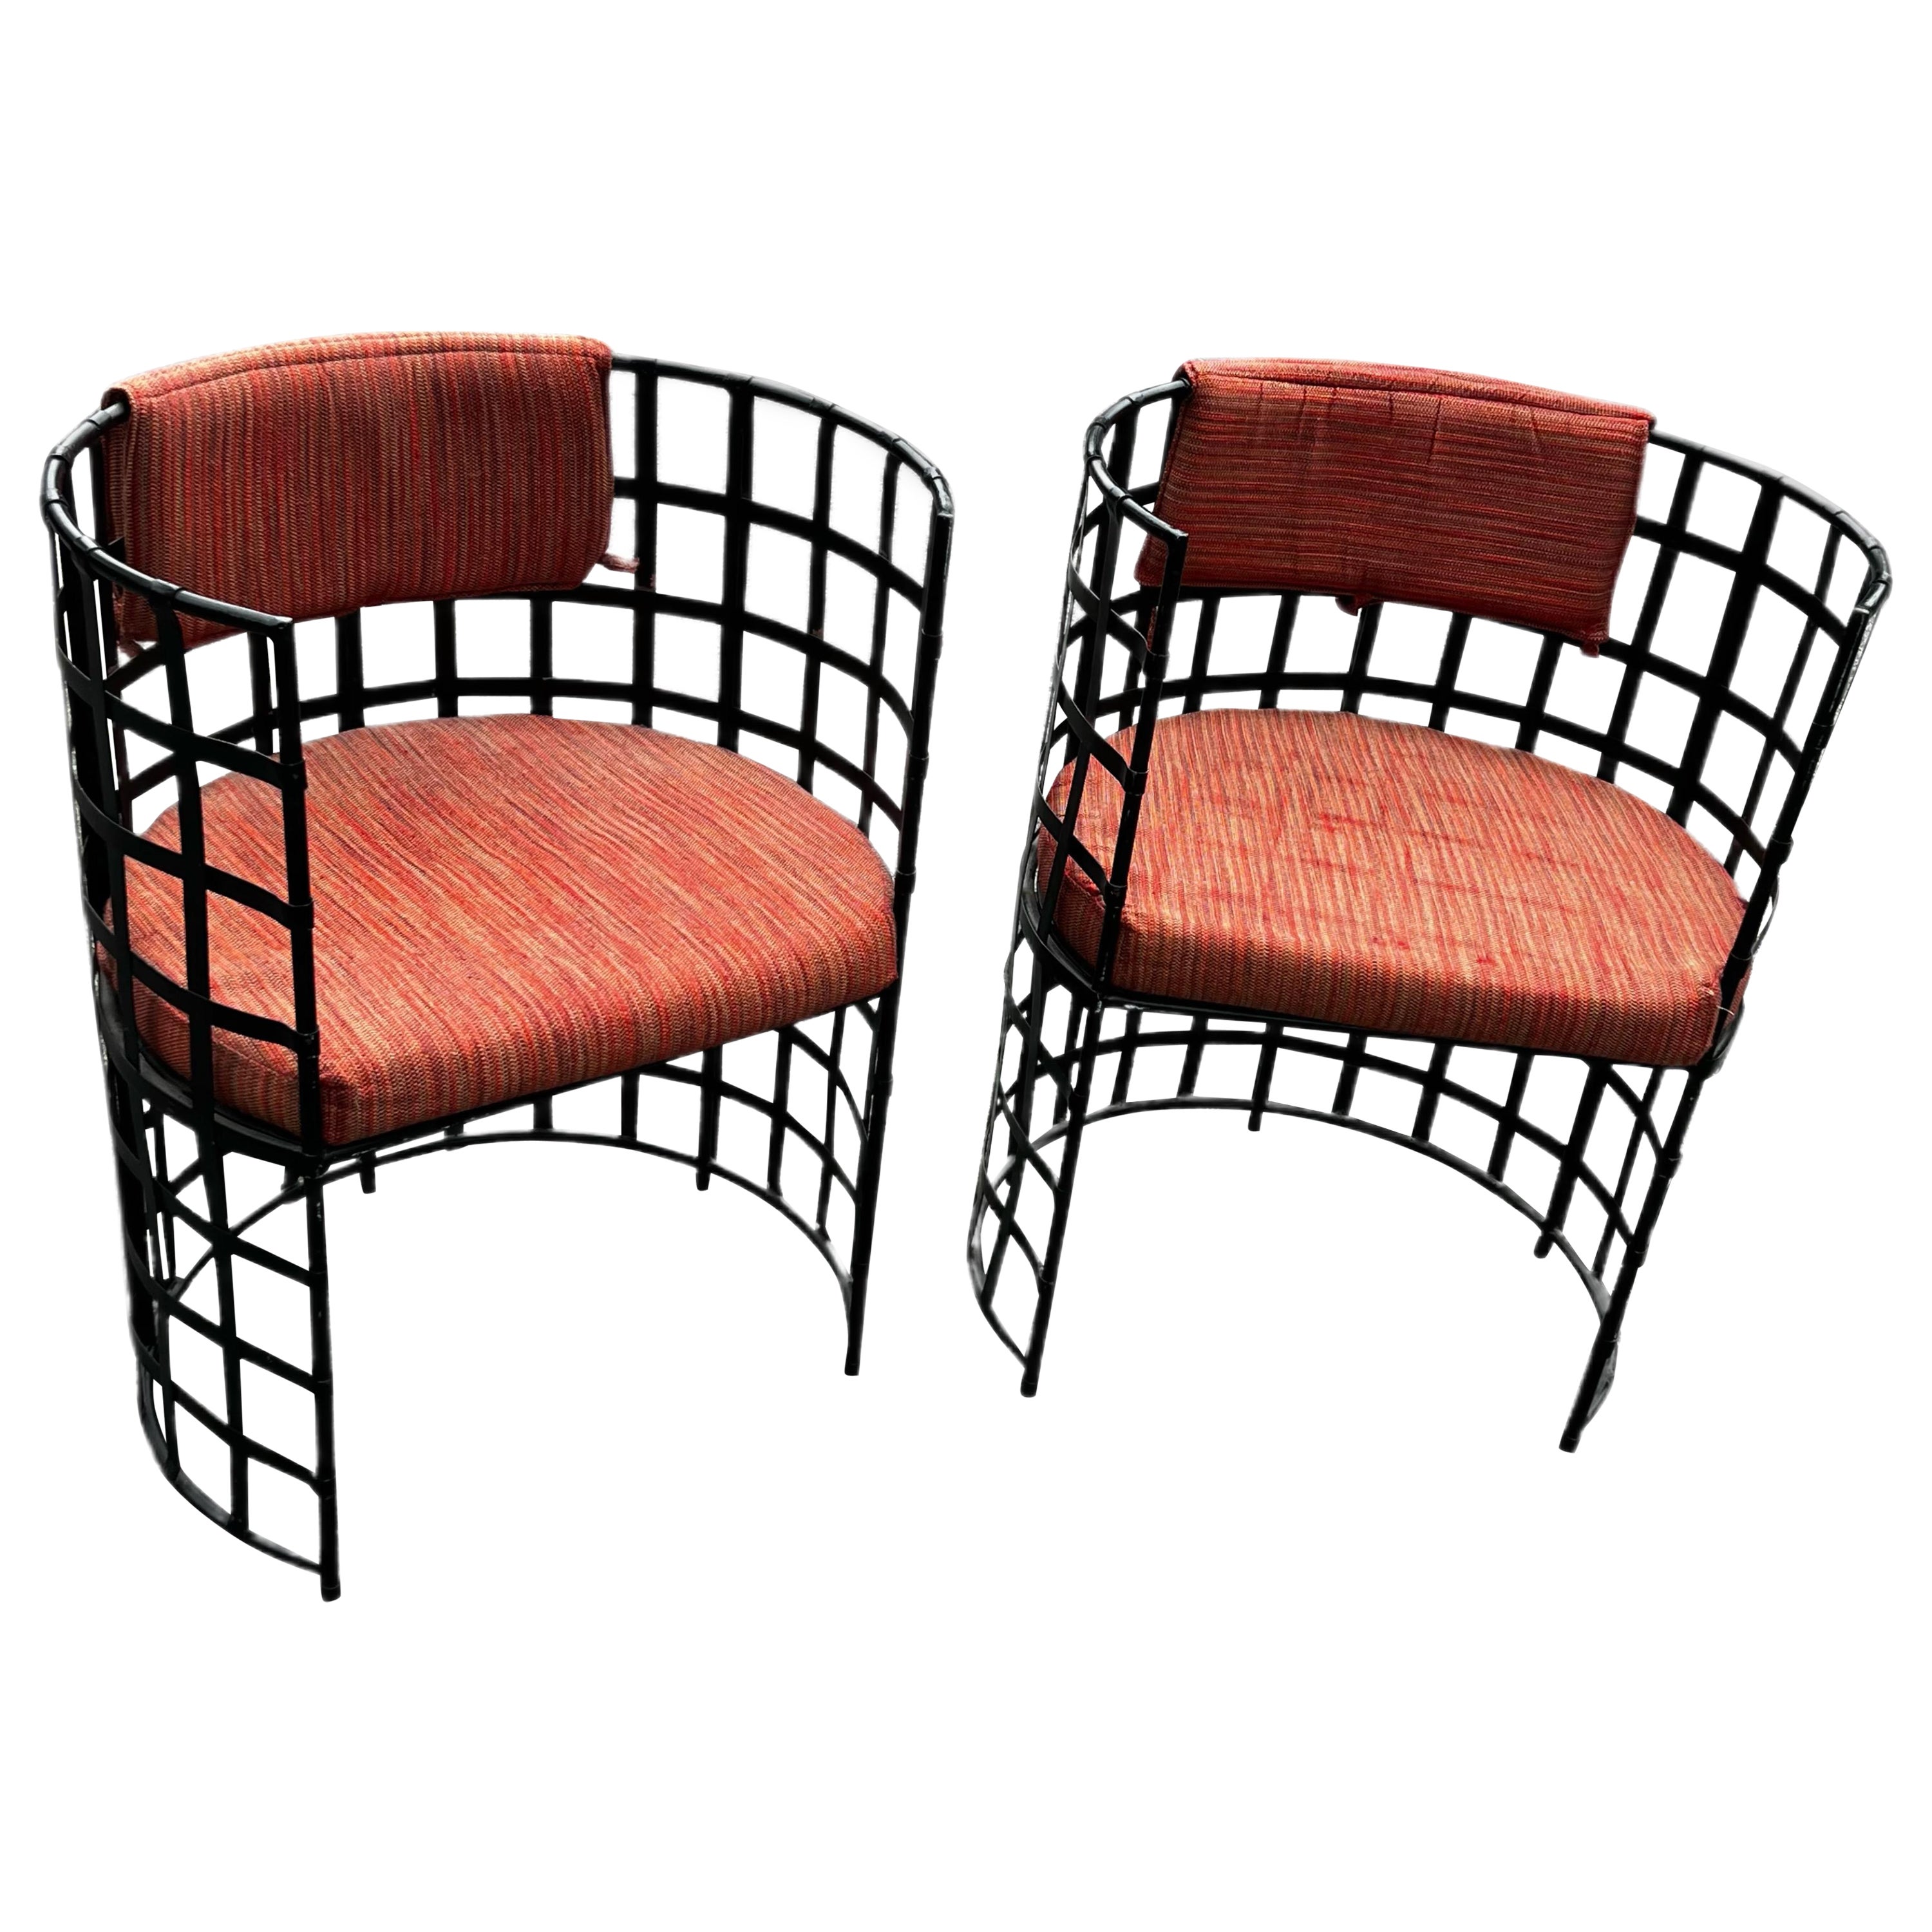 Vintage Wrought Iron Barrel Chairs in Tuscan Style, a Pair For Sale